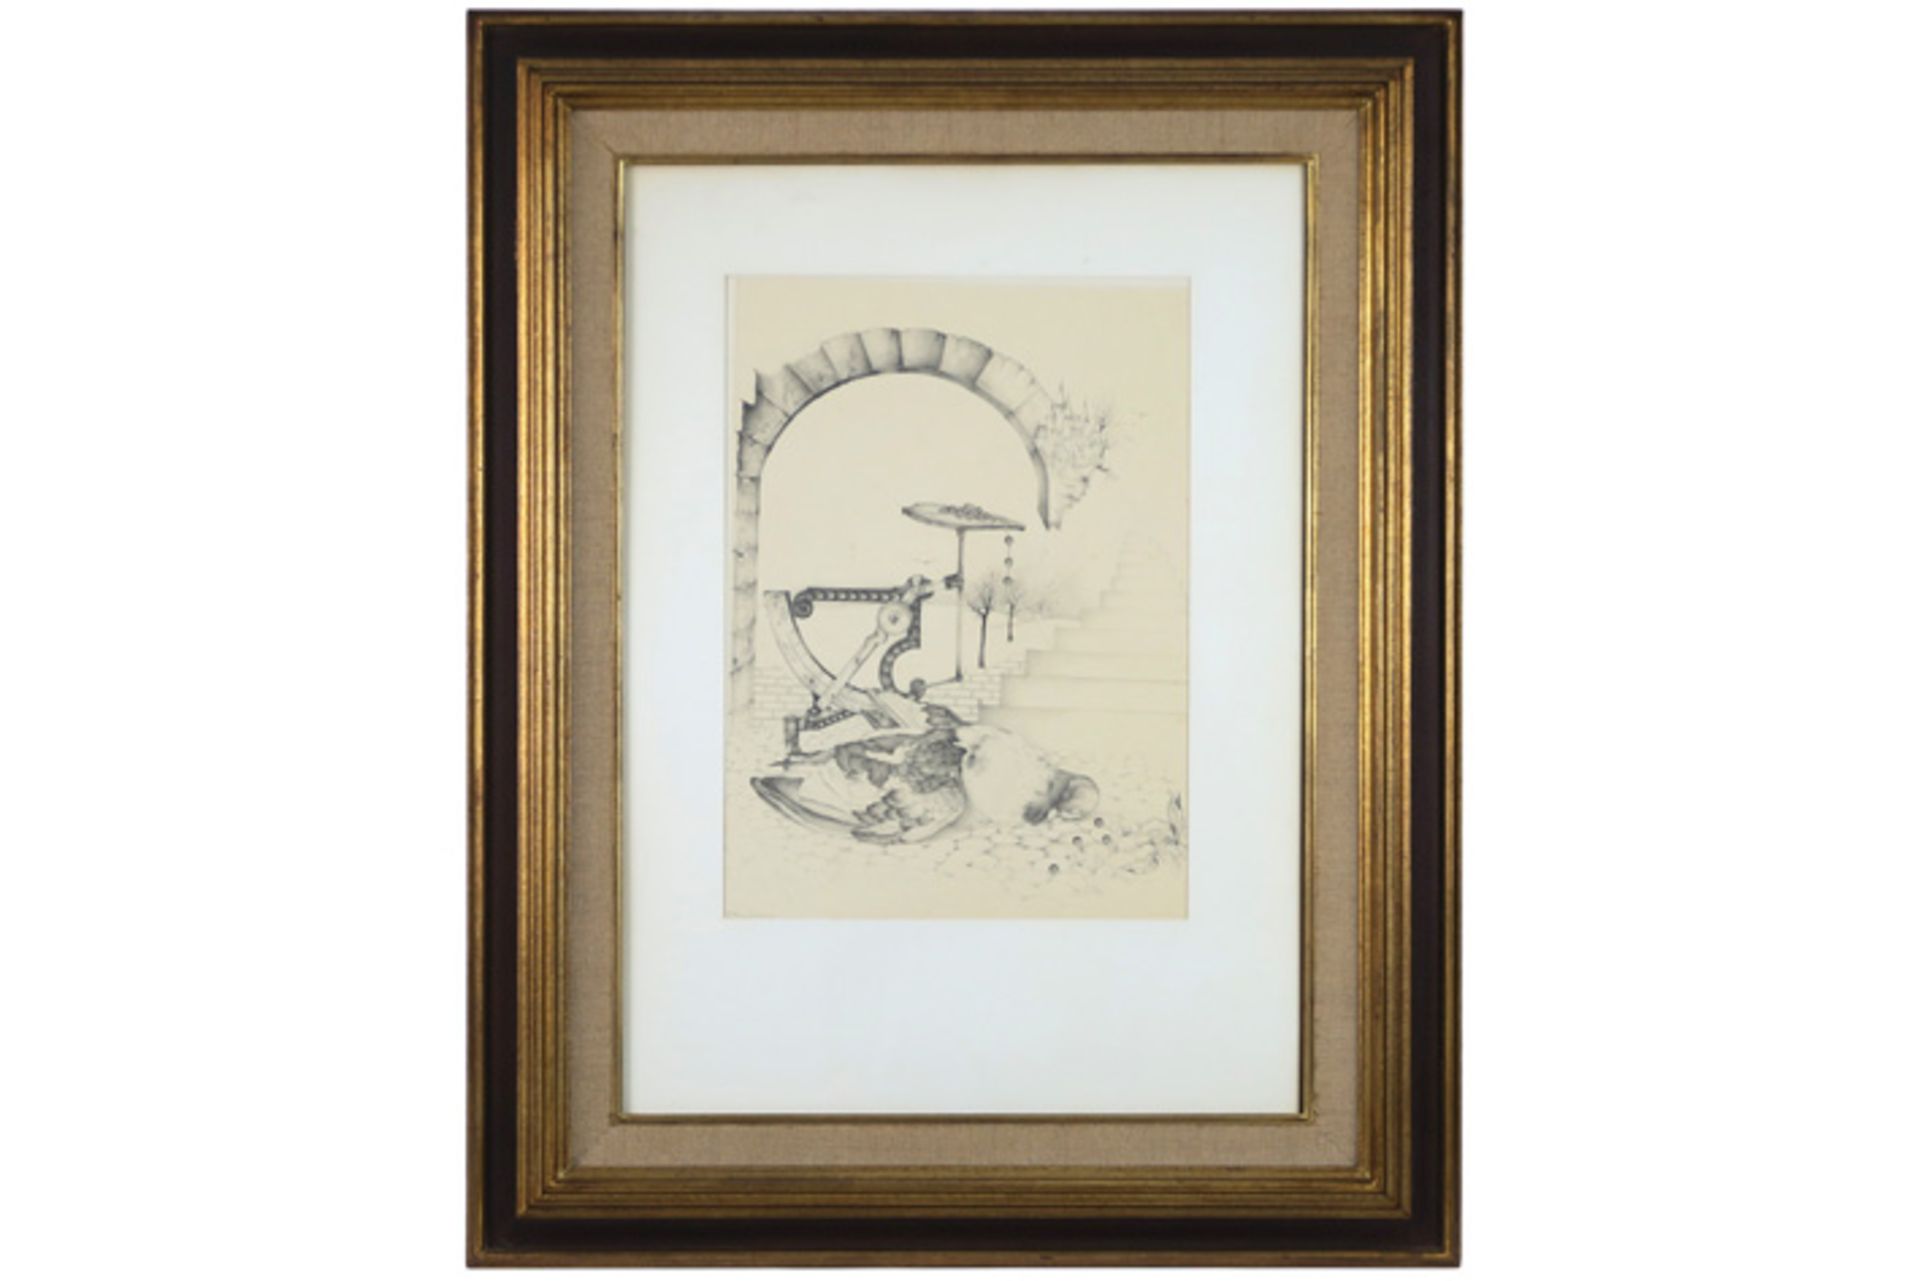 20th Cent. drawing with a surreal theme - signed G. Donatella||DONATELLA G. (20° - 21° EEUW) ( - Image 3 of 3